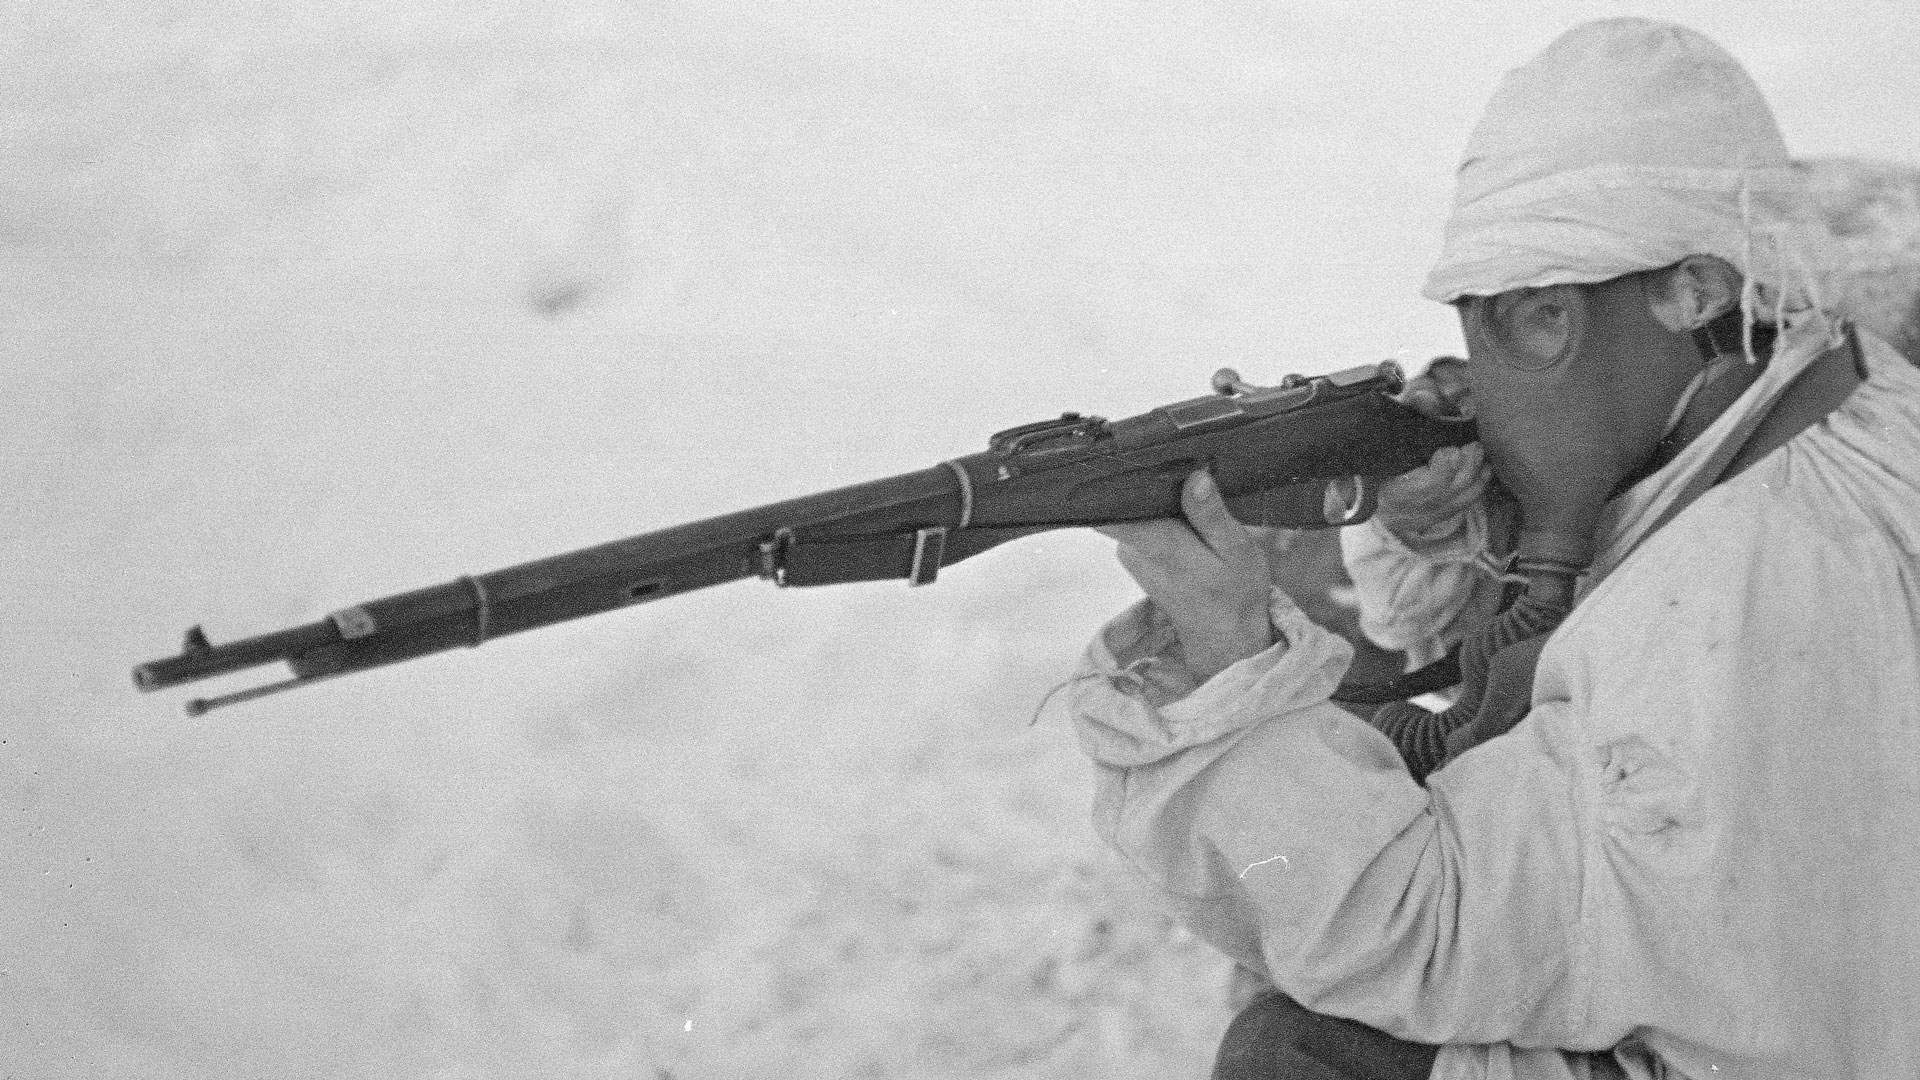 vintage finnish soldier with gas mask and mosin nagant rifle white clothing snow background